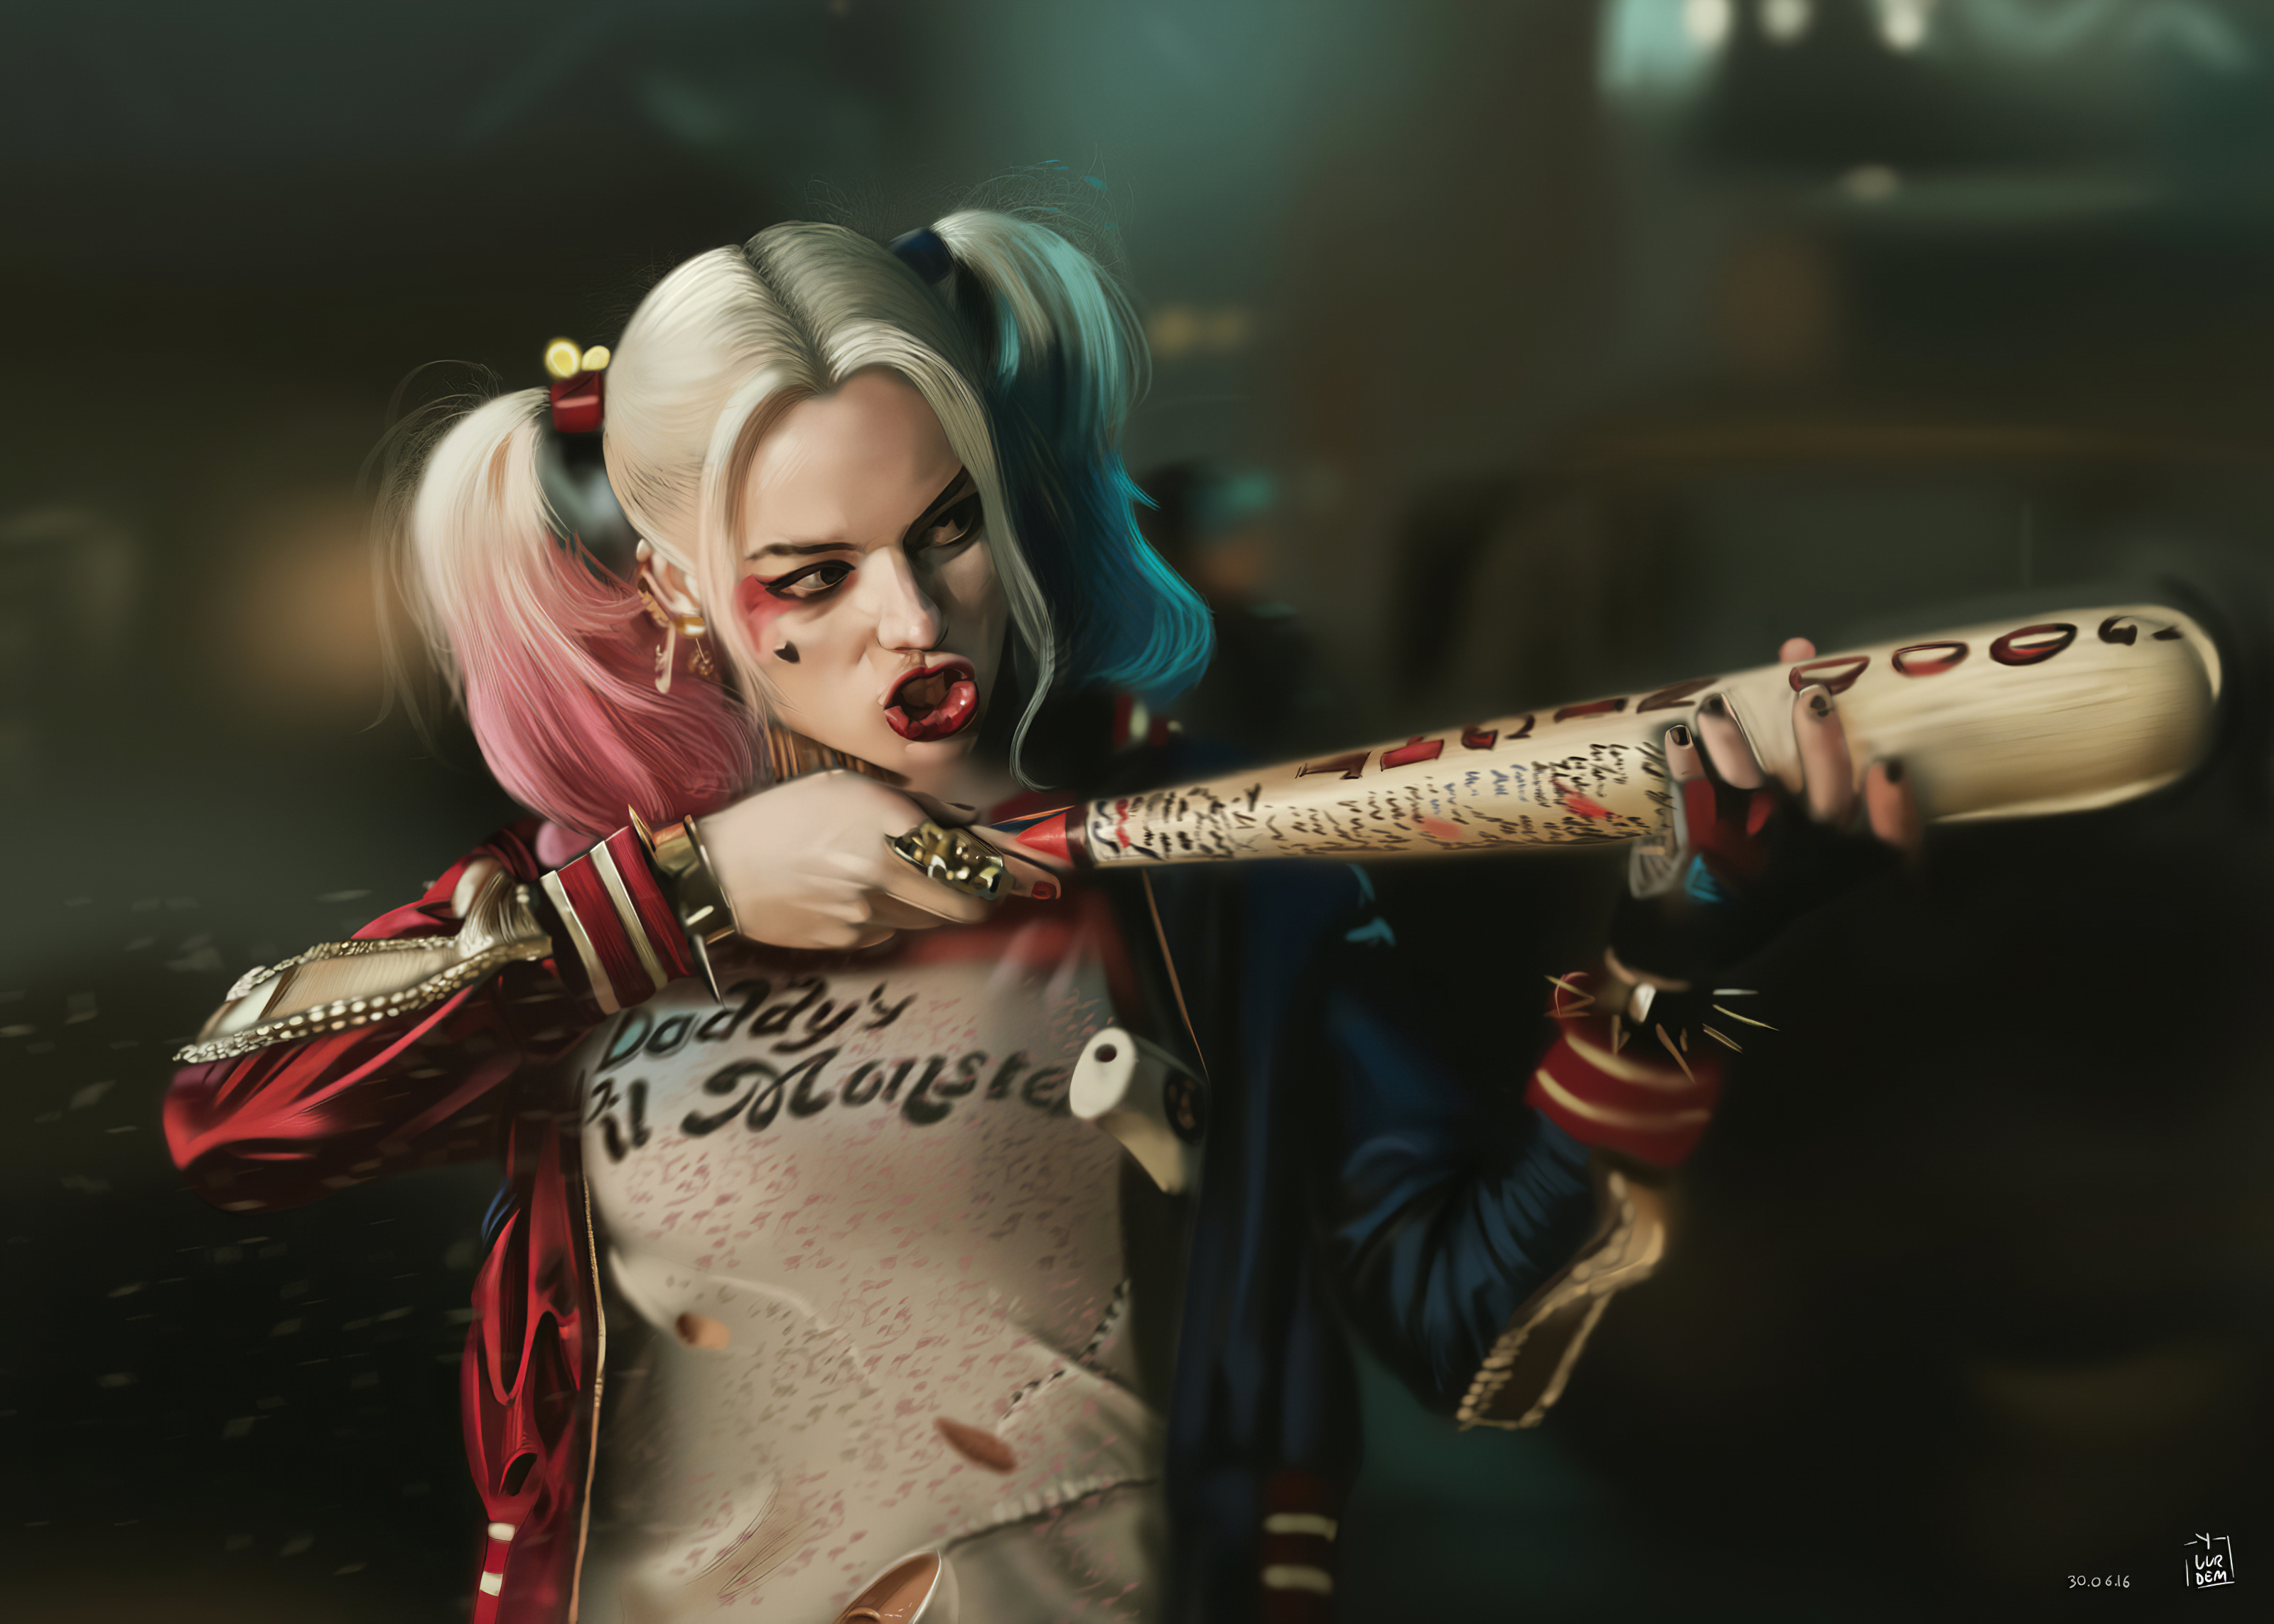 face, harley quinn, margot robbie, dc comics, movie, suicide squad, twintails, white hair, two toned hair